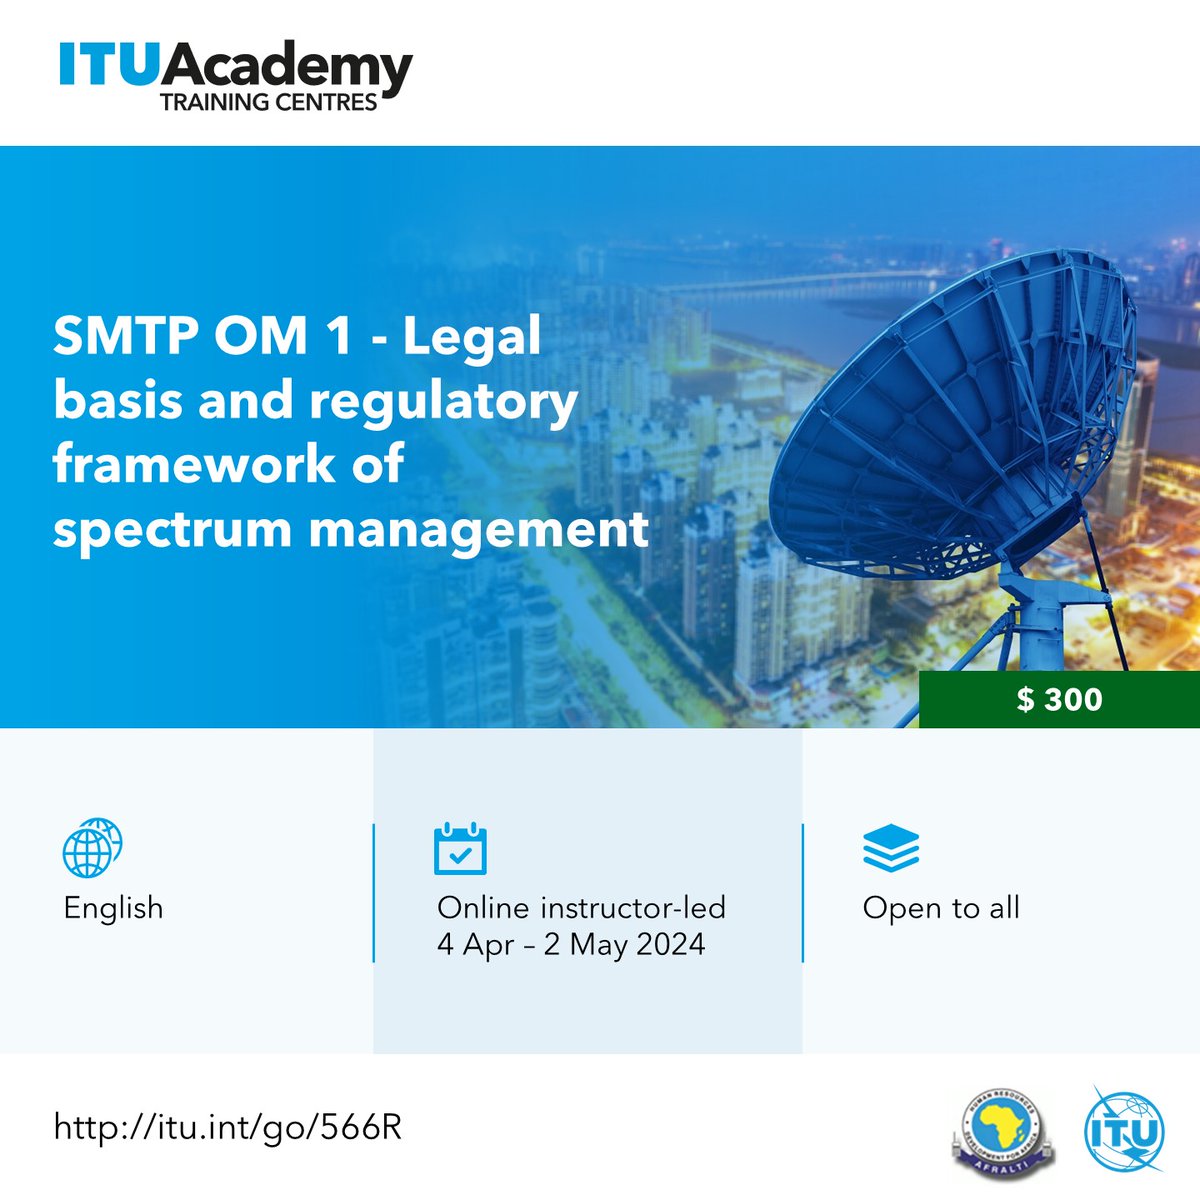 🎓#ITUacademy presents: Designed for learners within #ICT and telecom sectors who wish to enhance their knowledge & competence in spectrum management - register now to explore the legal framework & authorization processes of radio services! itu.int/go/566R